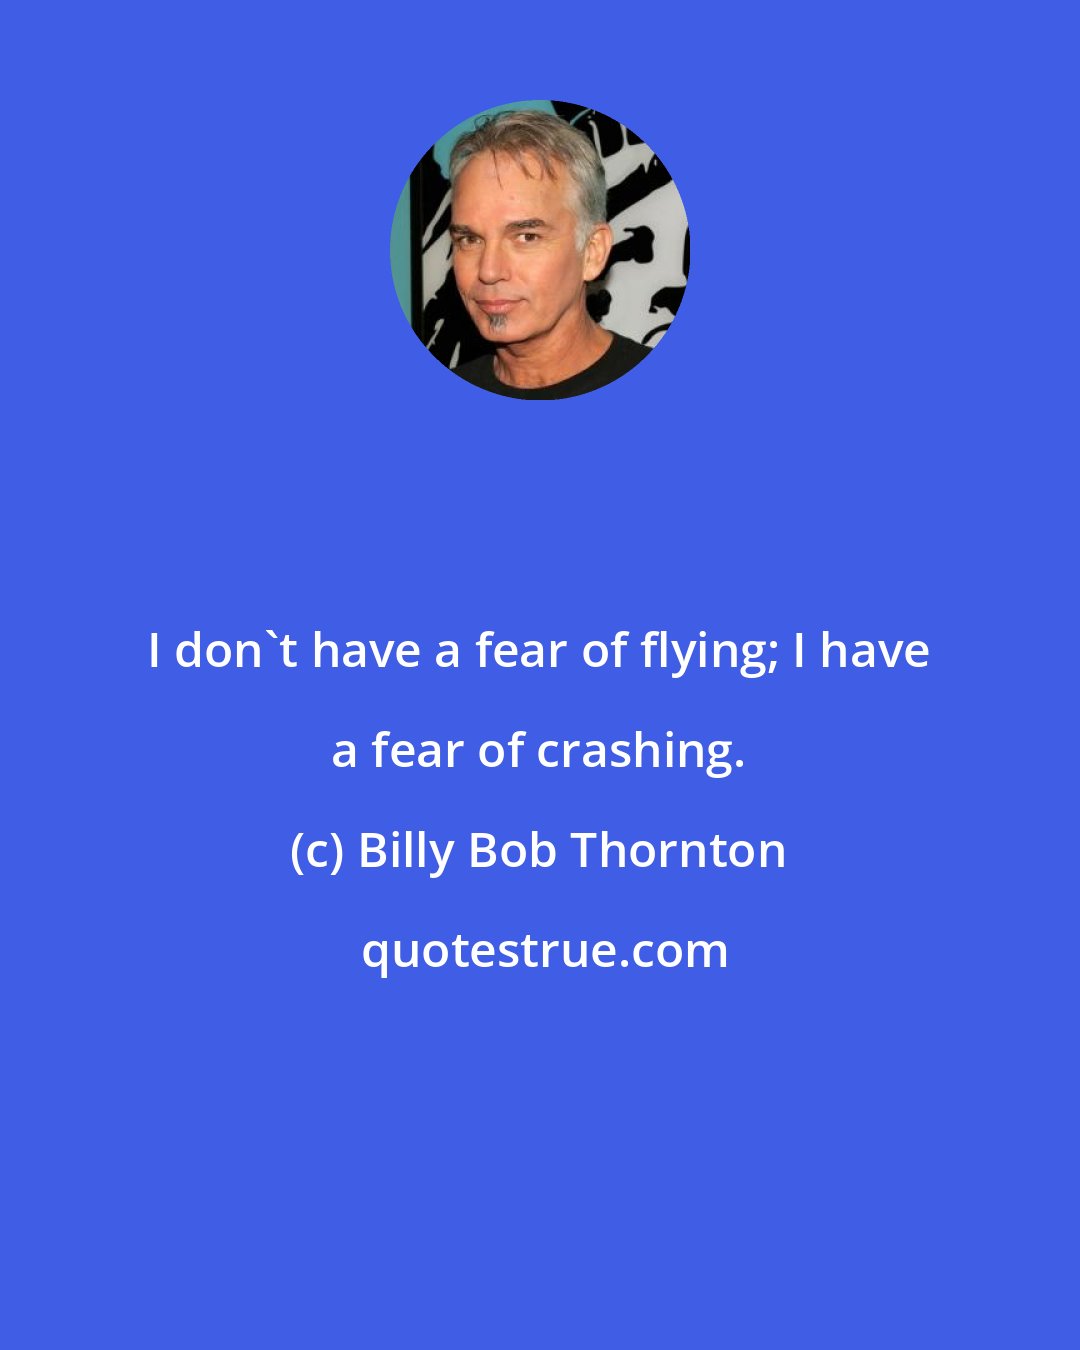 Billy Bob Thornton: I don't have a fear of flying; I have a fear of crashing.